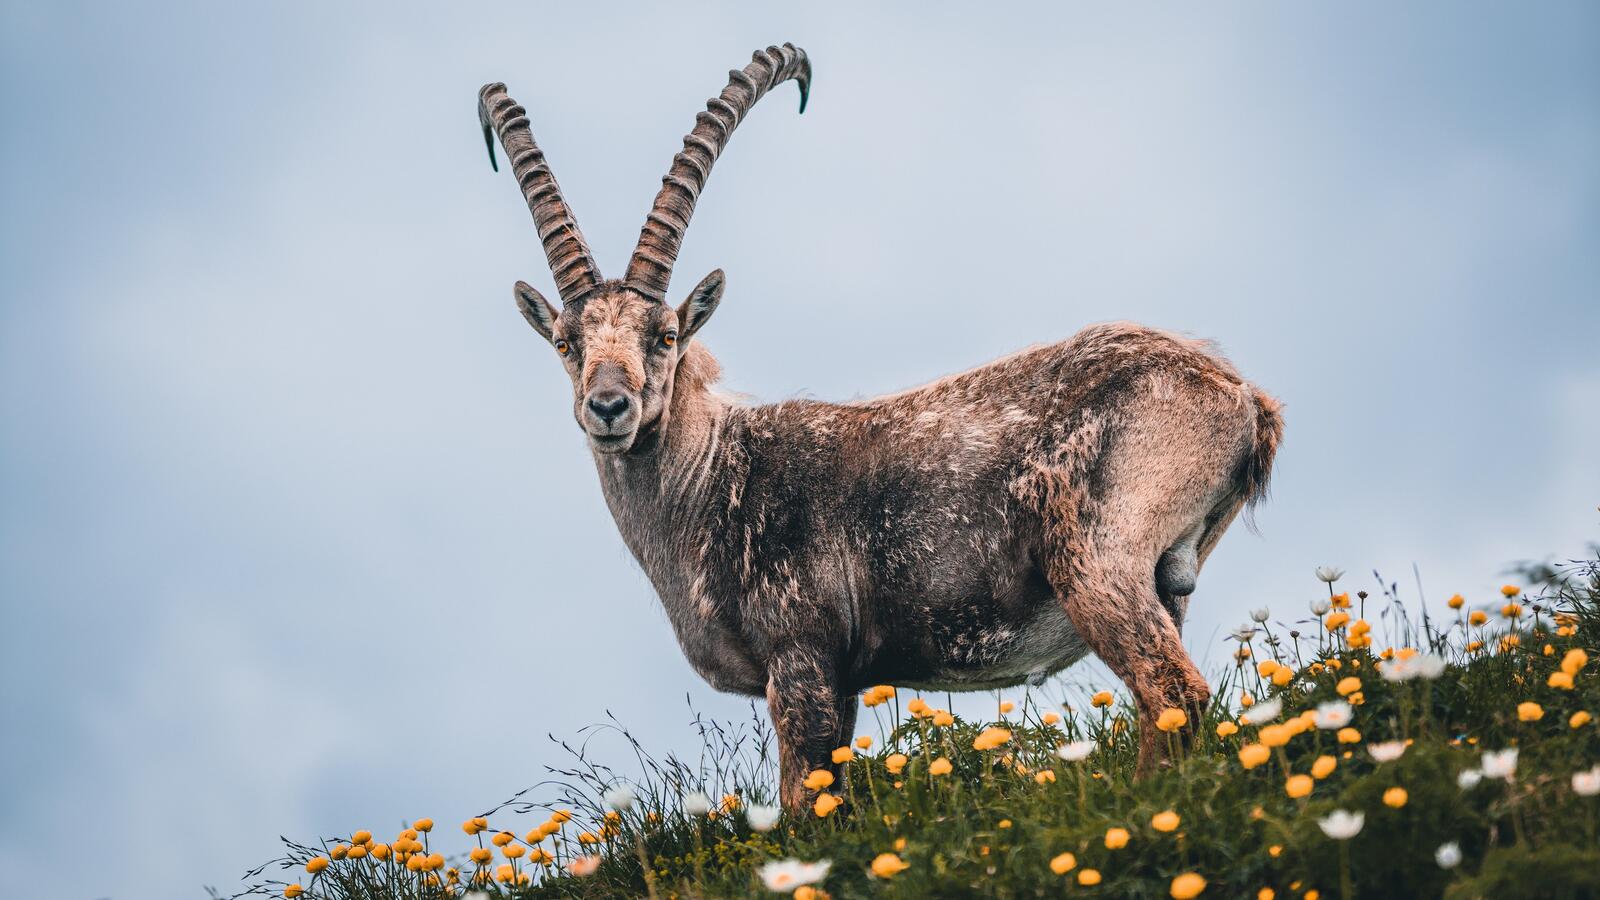 Free photo A goat with big horns stands in a green field with flowers